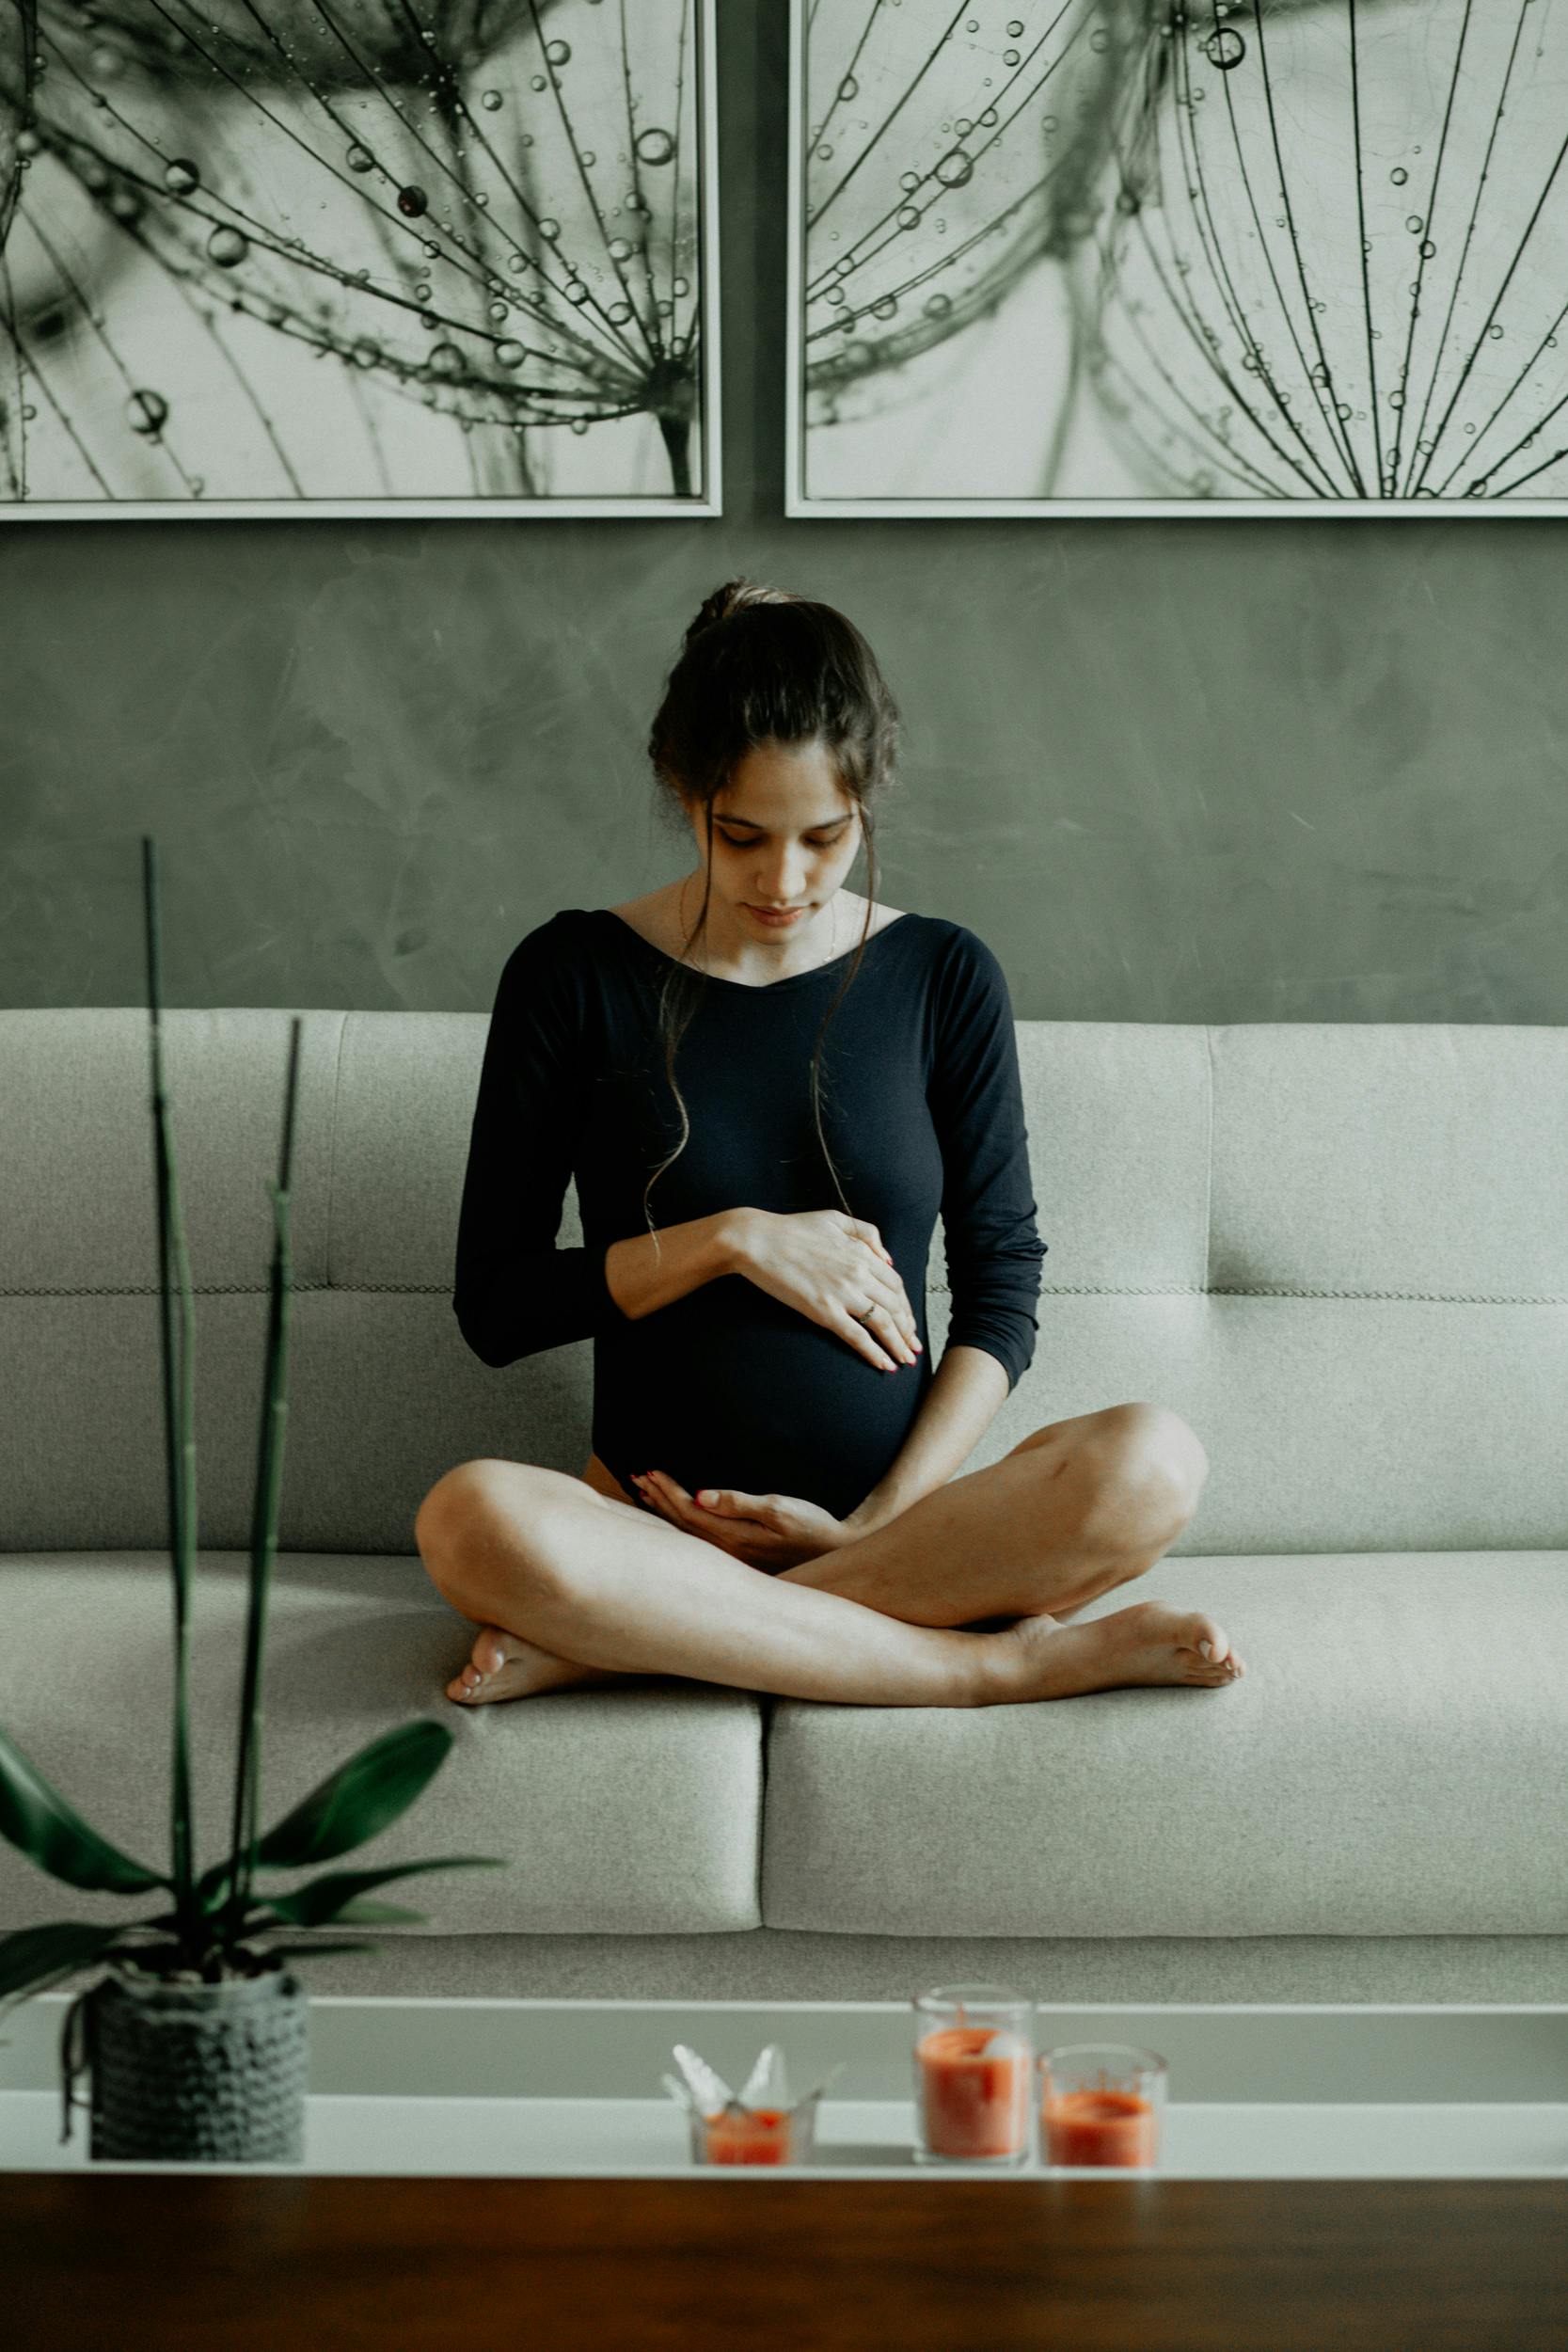 A pregnant woman sitting on the couch while touching her belly | Source: Pexels